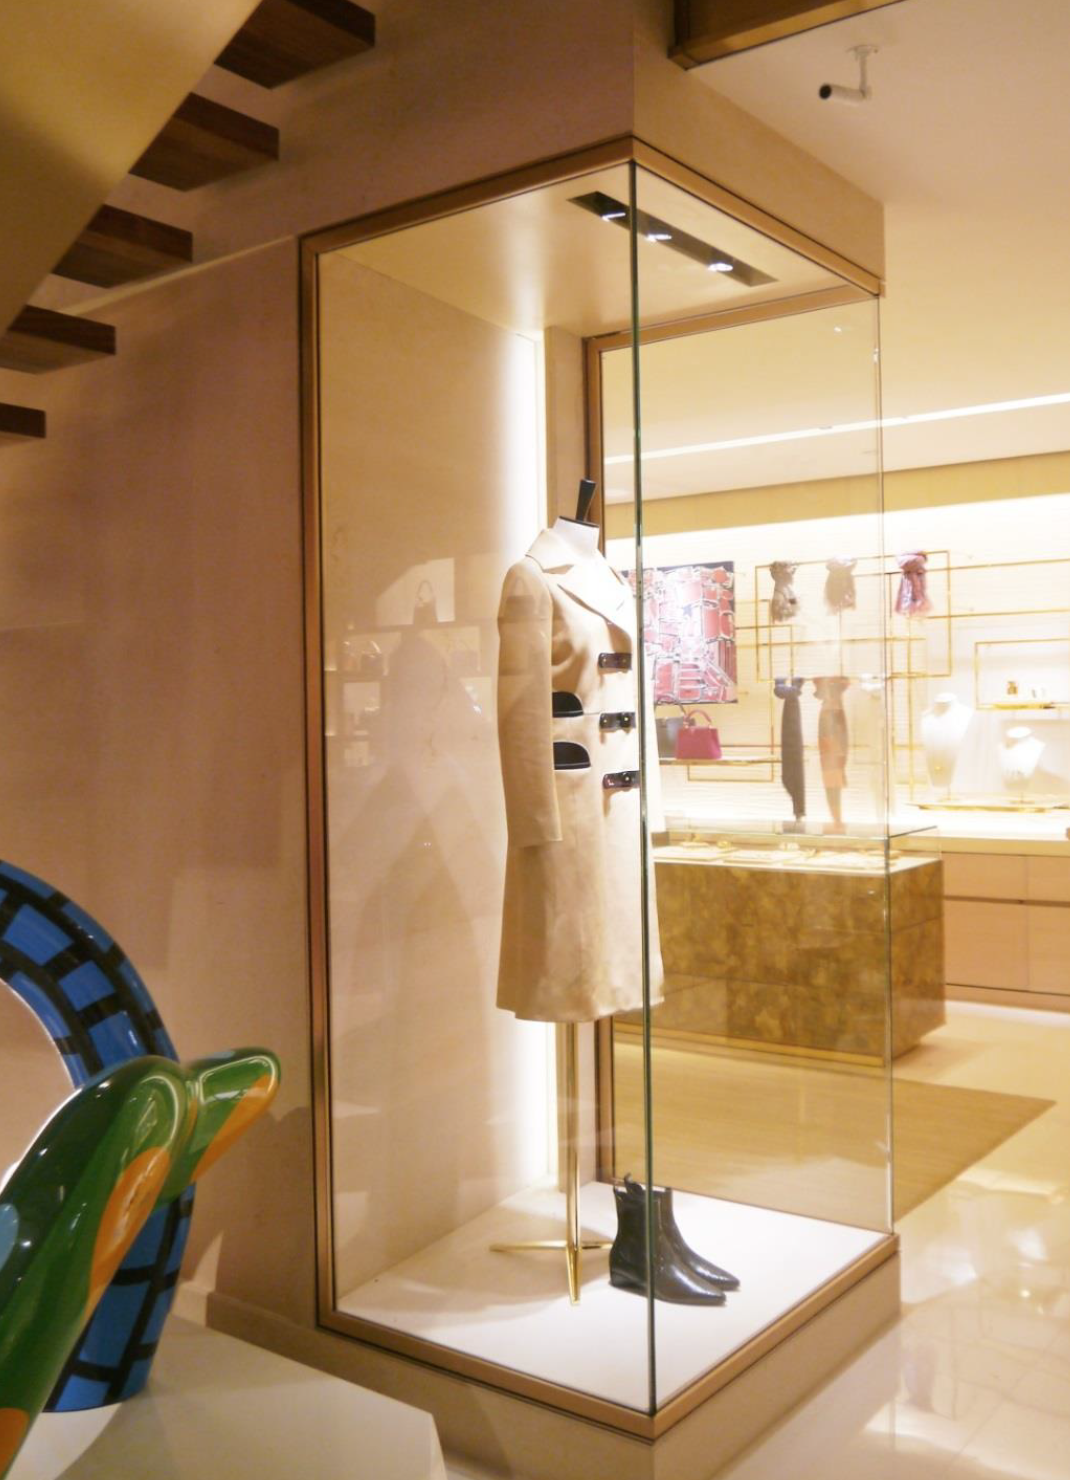 Louis Vuitton at The Palazzo Prepares for $269,000 Remodel